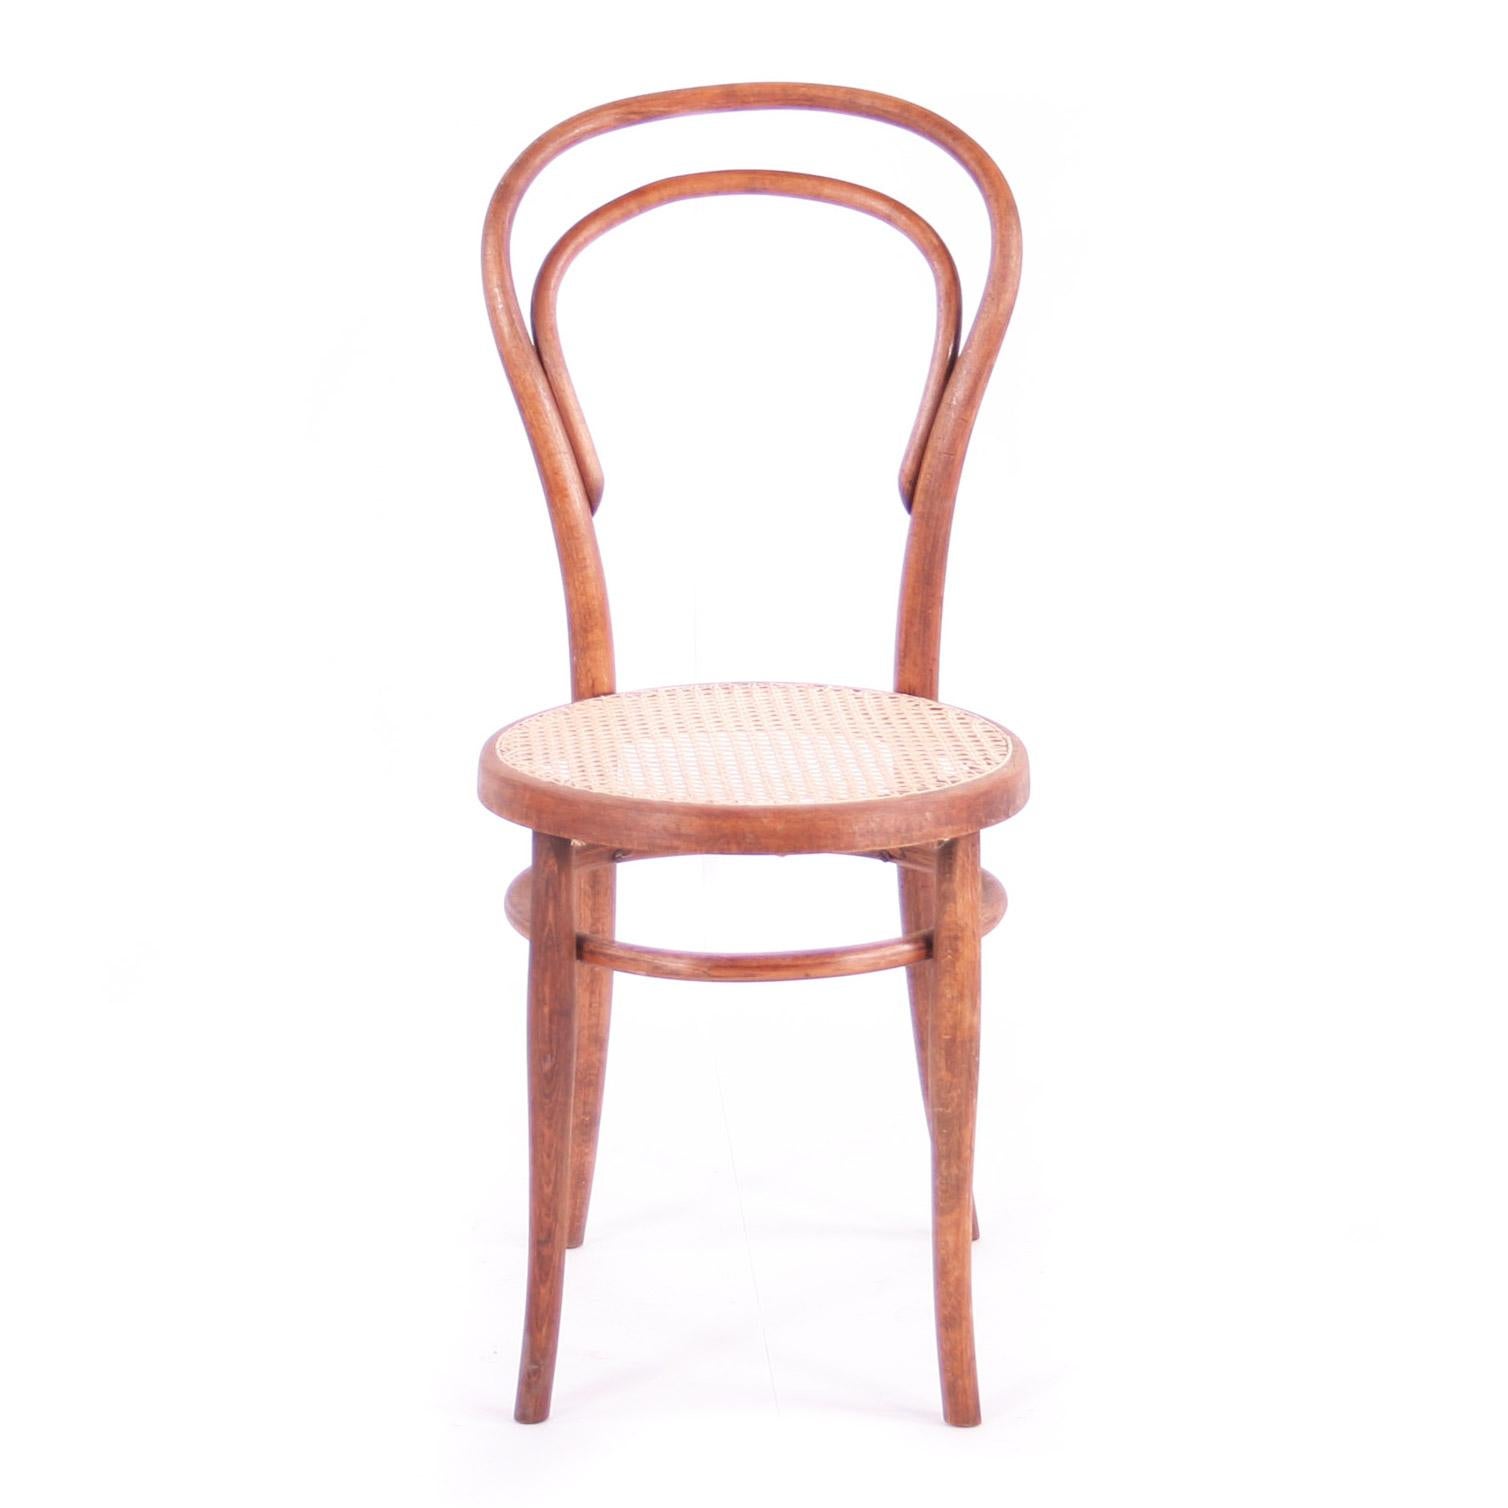 Original piece of furniture after renovation.
Classical and beautiful Thonet chair, which was made in 1900-1910. Bent furniture was very popular and made in several factories. The chair is made of bentwood and the seat is handwoven with rattan. The